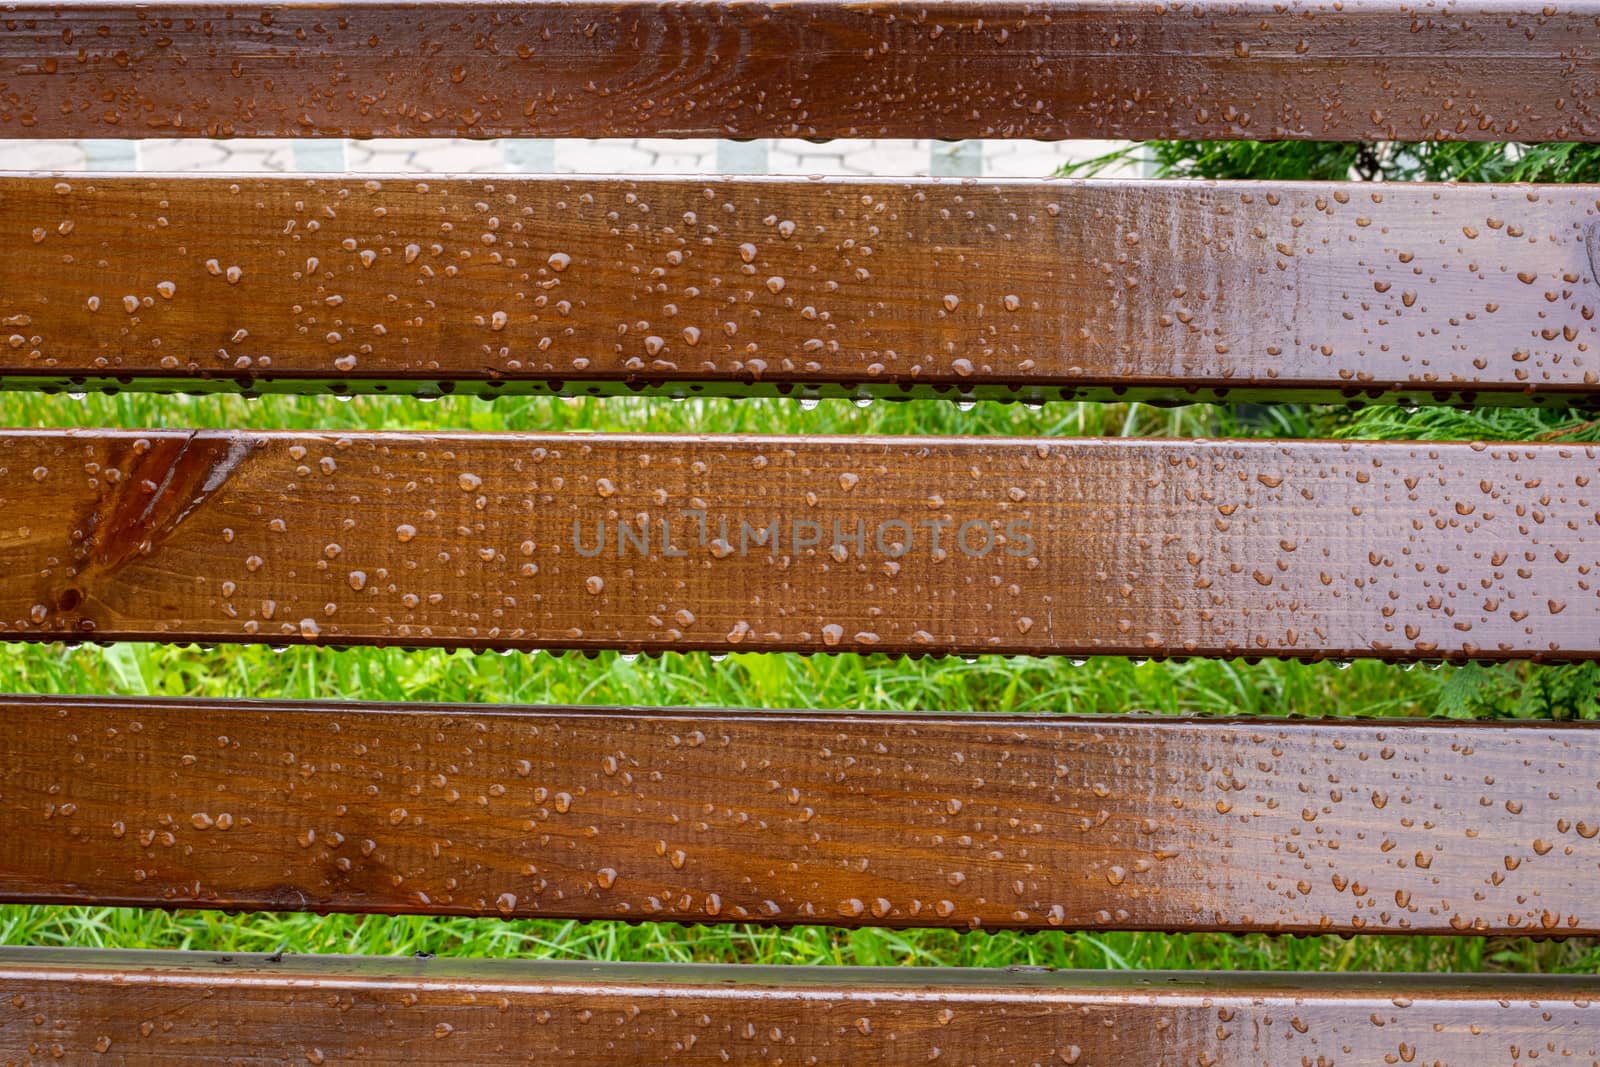 Drops of water on wooden bench after the rain, natural weather background by lapushka62